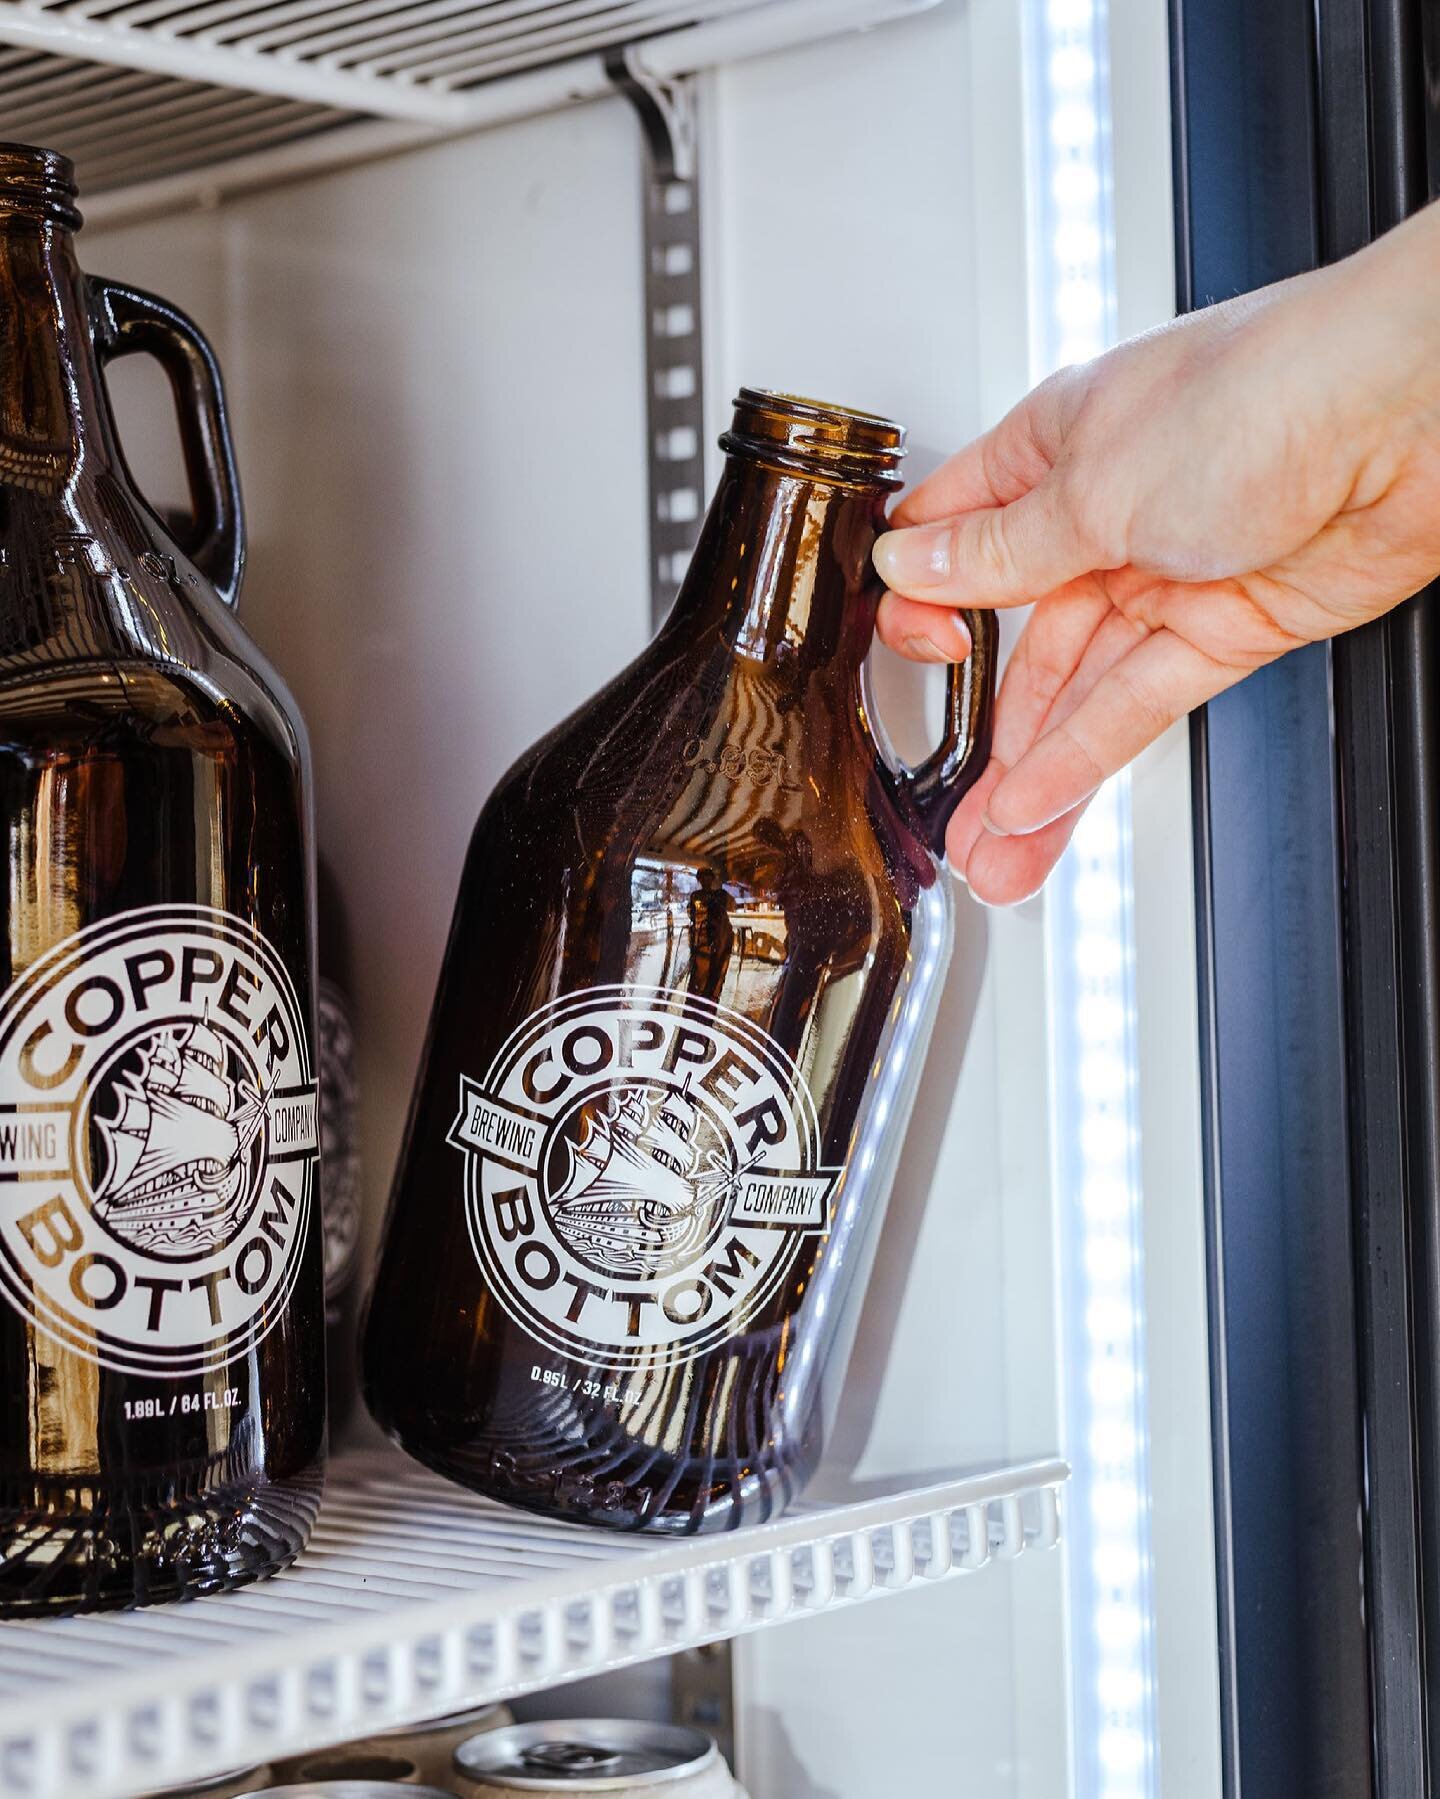 Last but not least, our Sunday deal is a special on growler fills. Fill any 64oz growler on a Sunday and get $2 off your purchase!

#SundayFunday